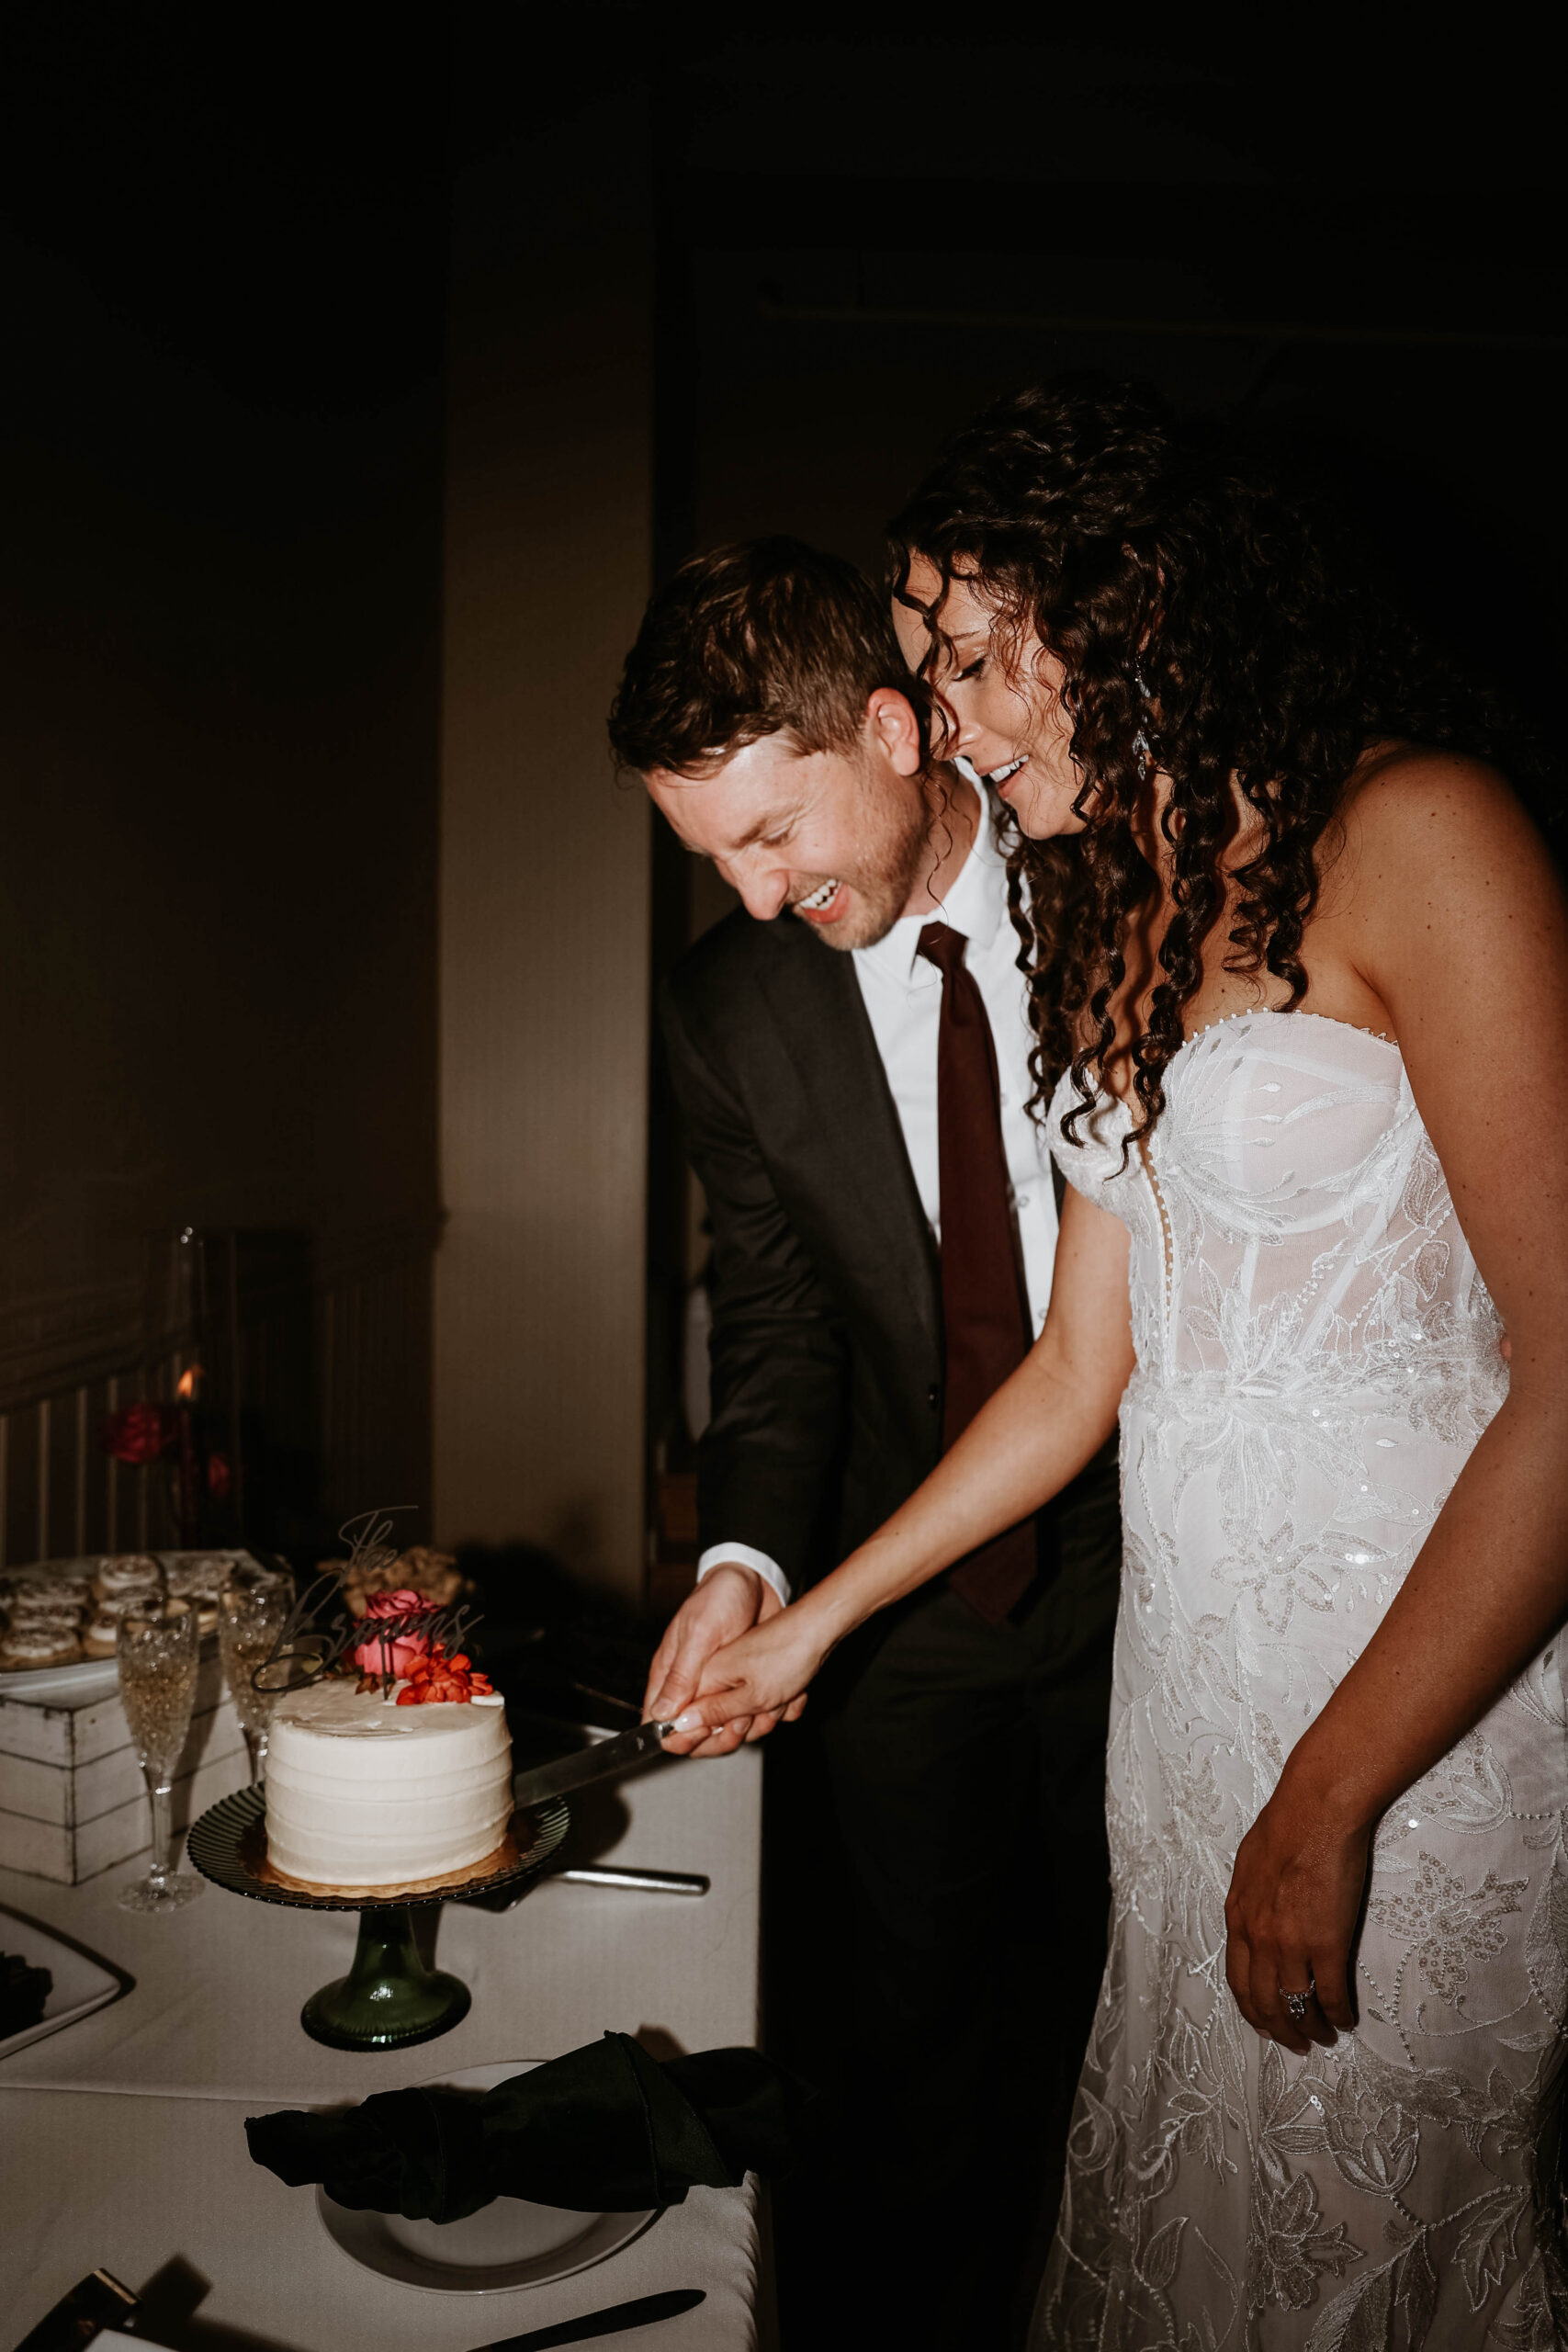 bride and groom cutting the cake 